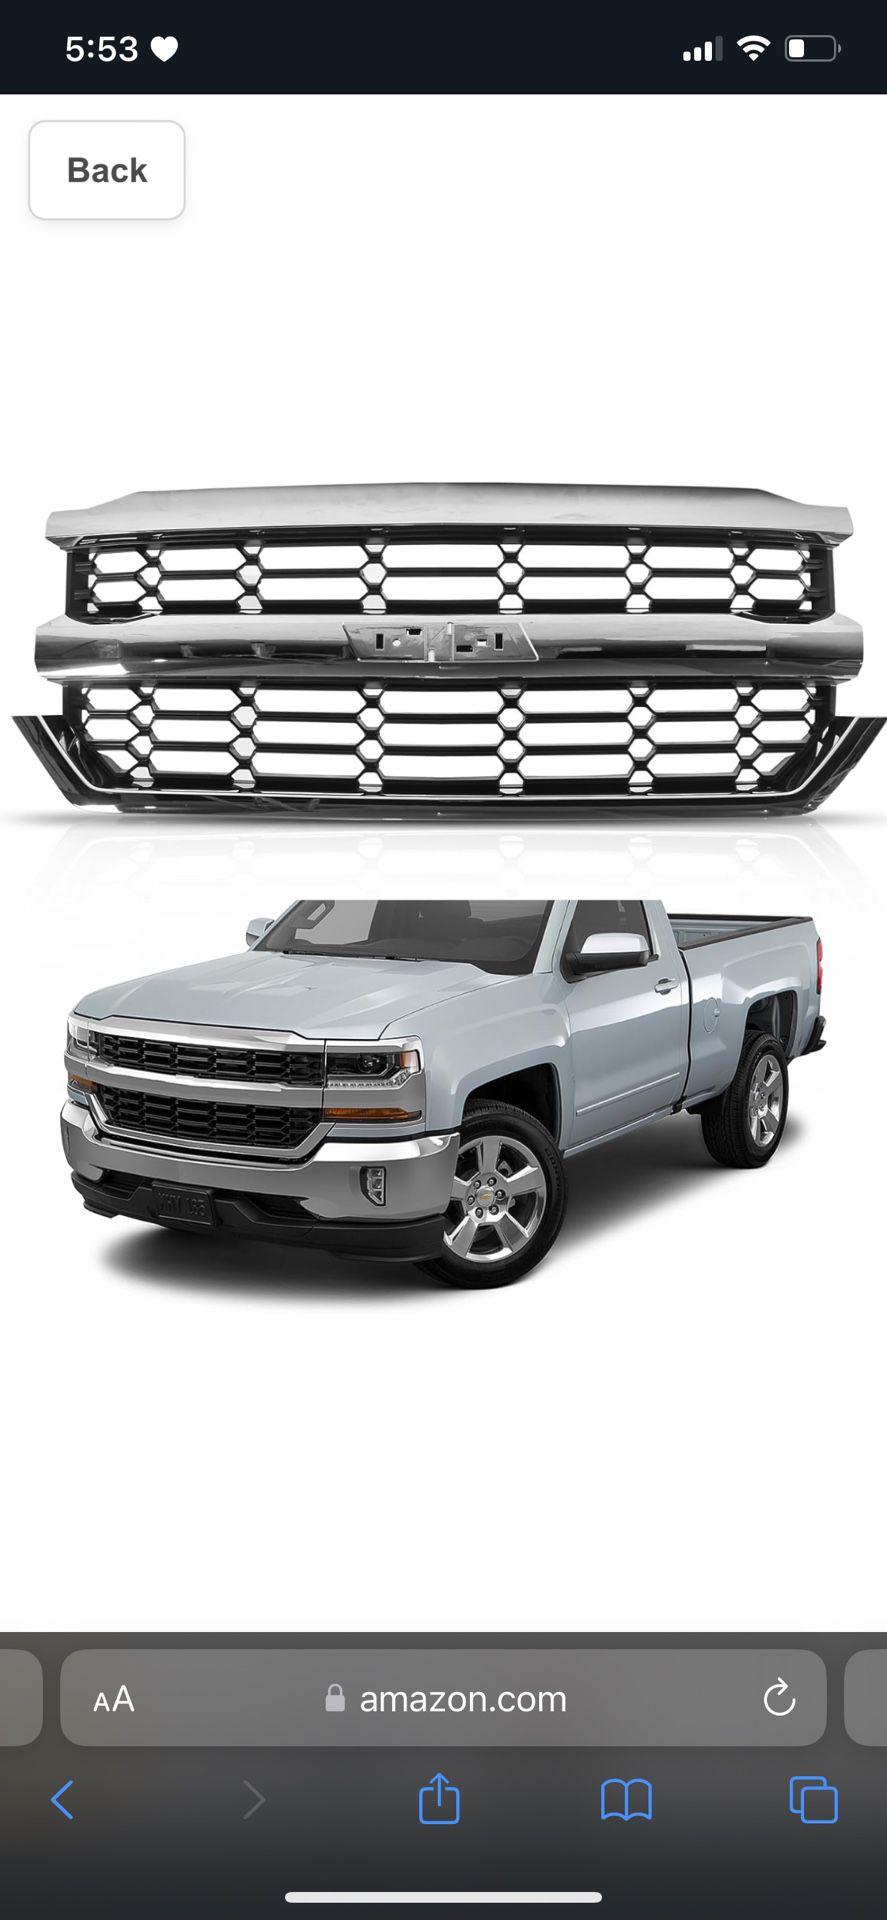 2016-2018 Chevy 1500 Grill